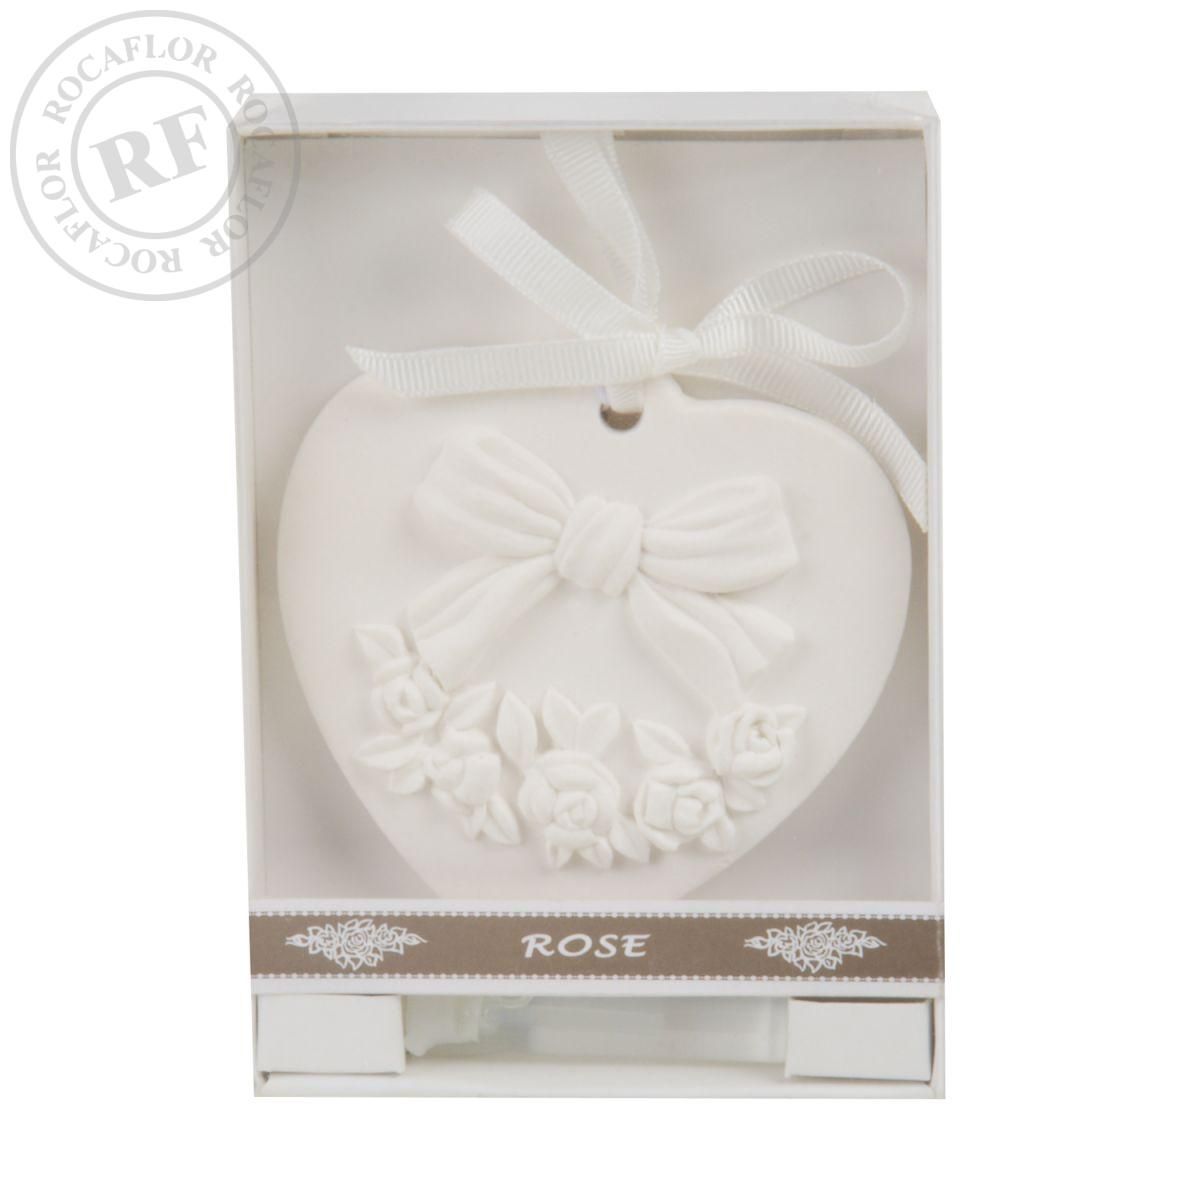 rose scented ornament in giftbox